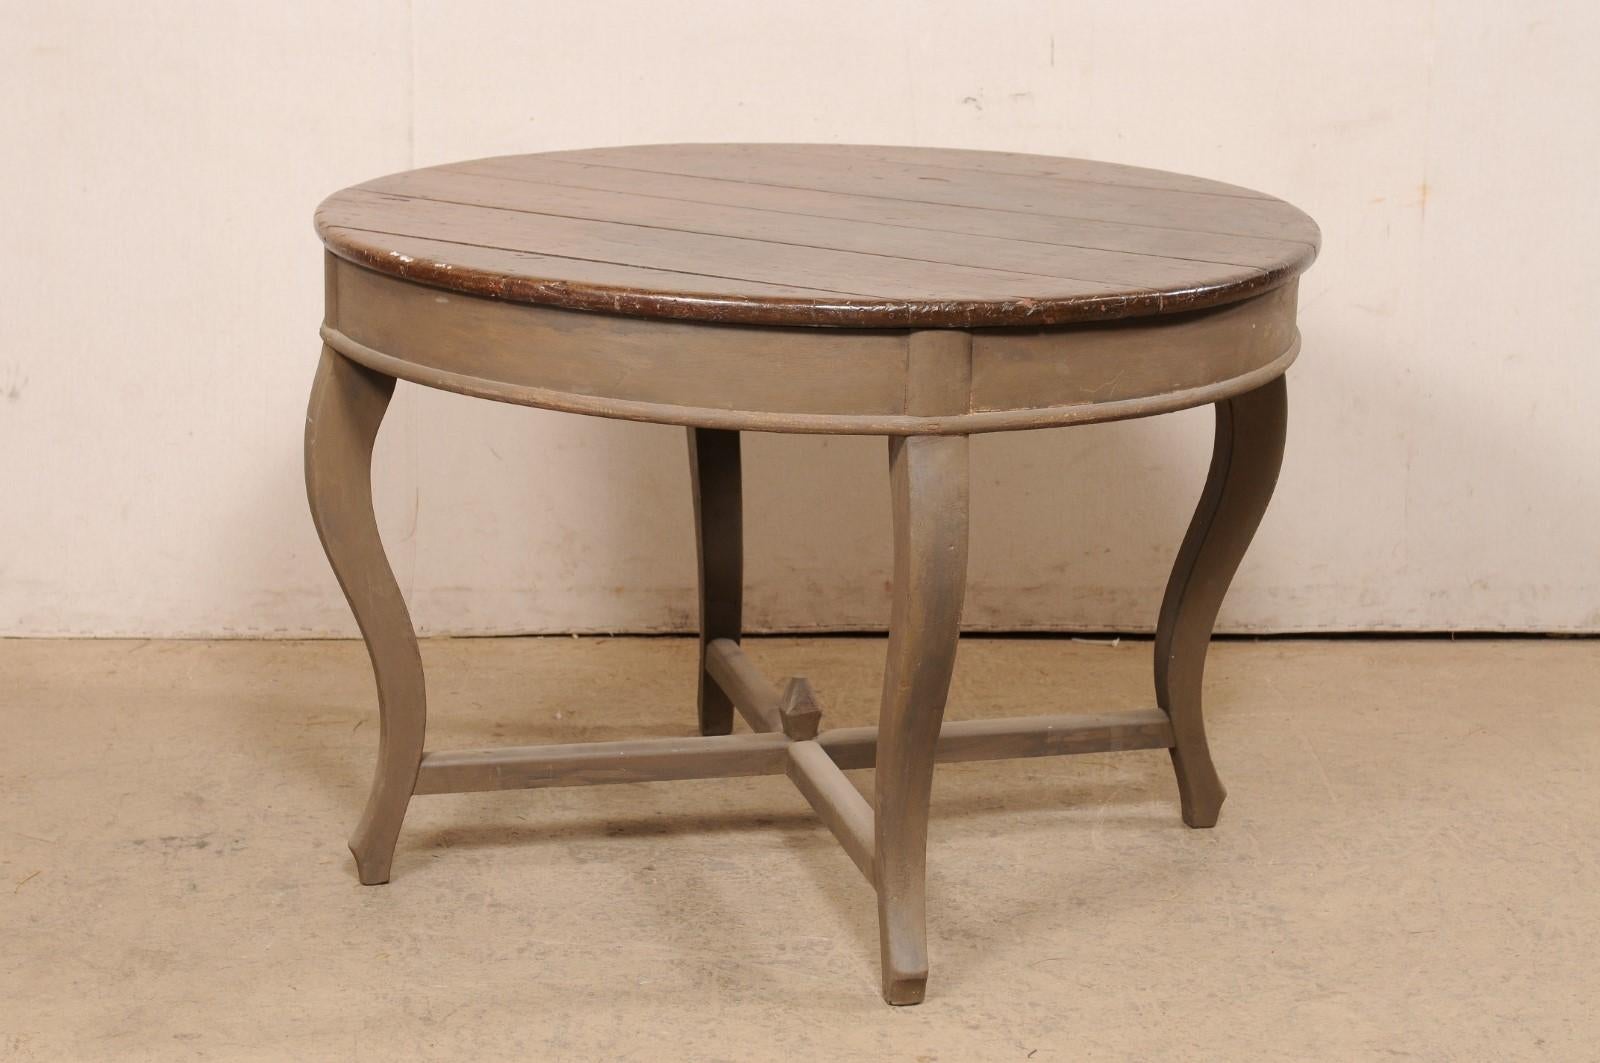 A Brazilian carved and painted peroba wood center table from the 19th century. This antique table from Brazil has a round-shaped top, over a plainly rounded skirt/apron, and raised on four curvy cabriole style legs. The legs are supported with a